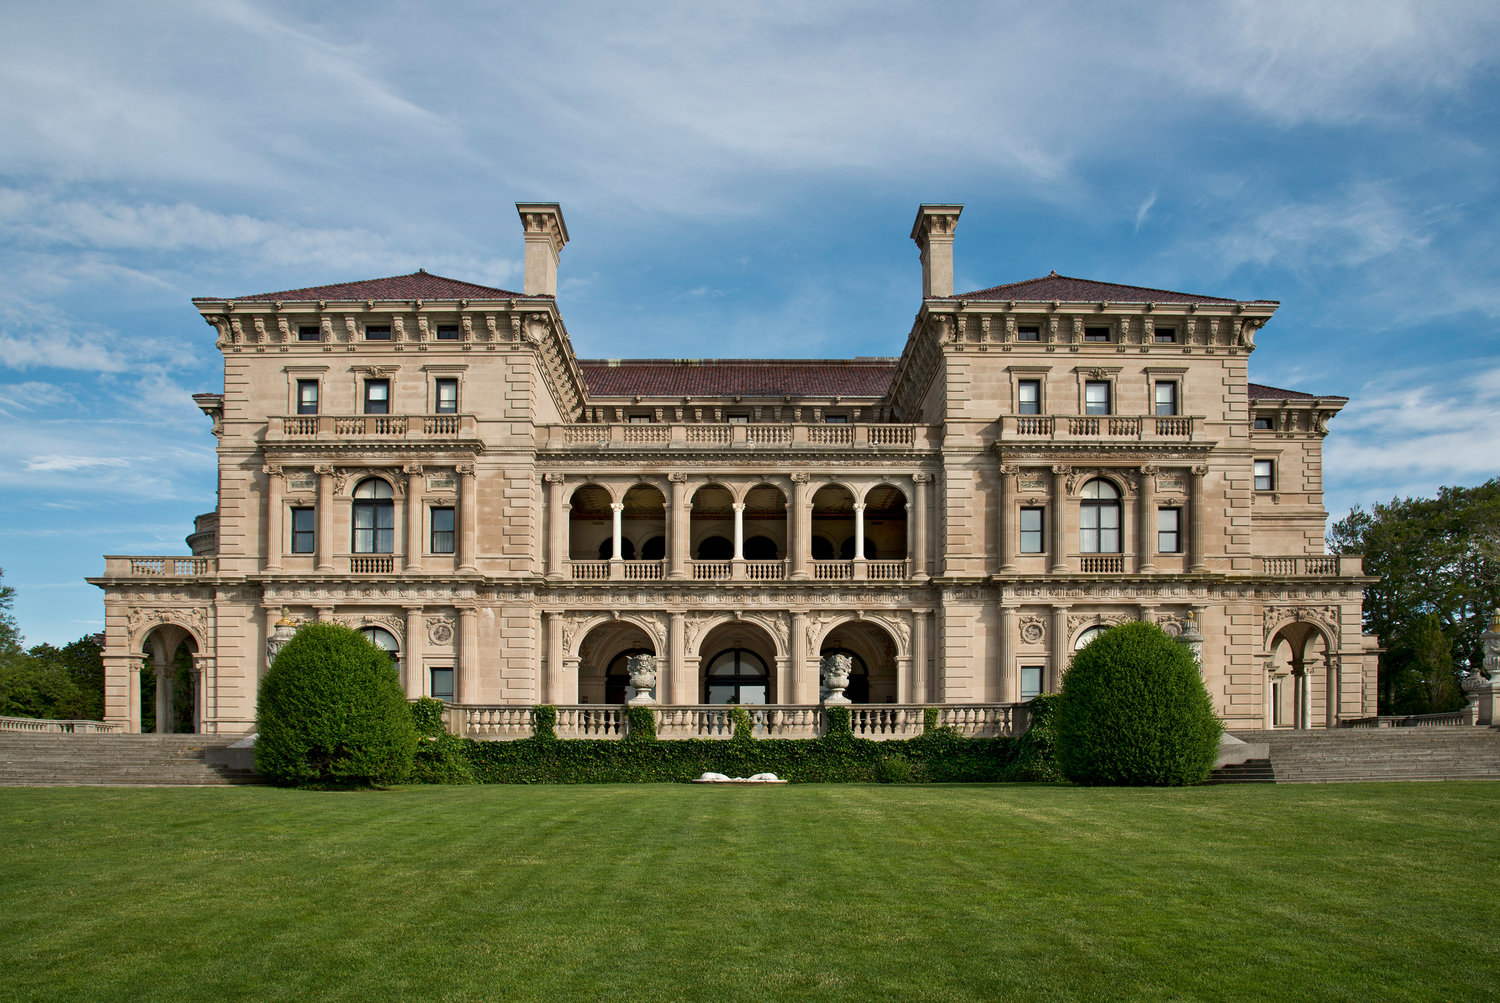 The Breakers transport visitors back to the Gilded Age of Newport’s rich and famous